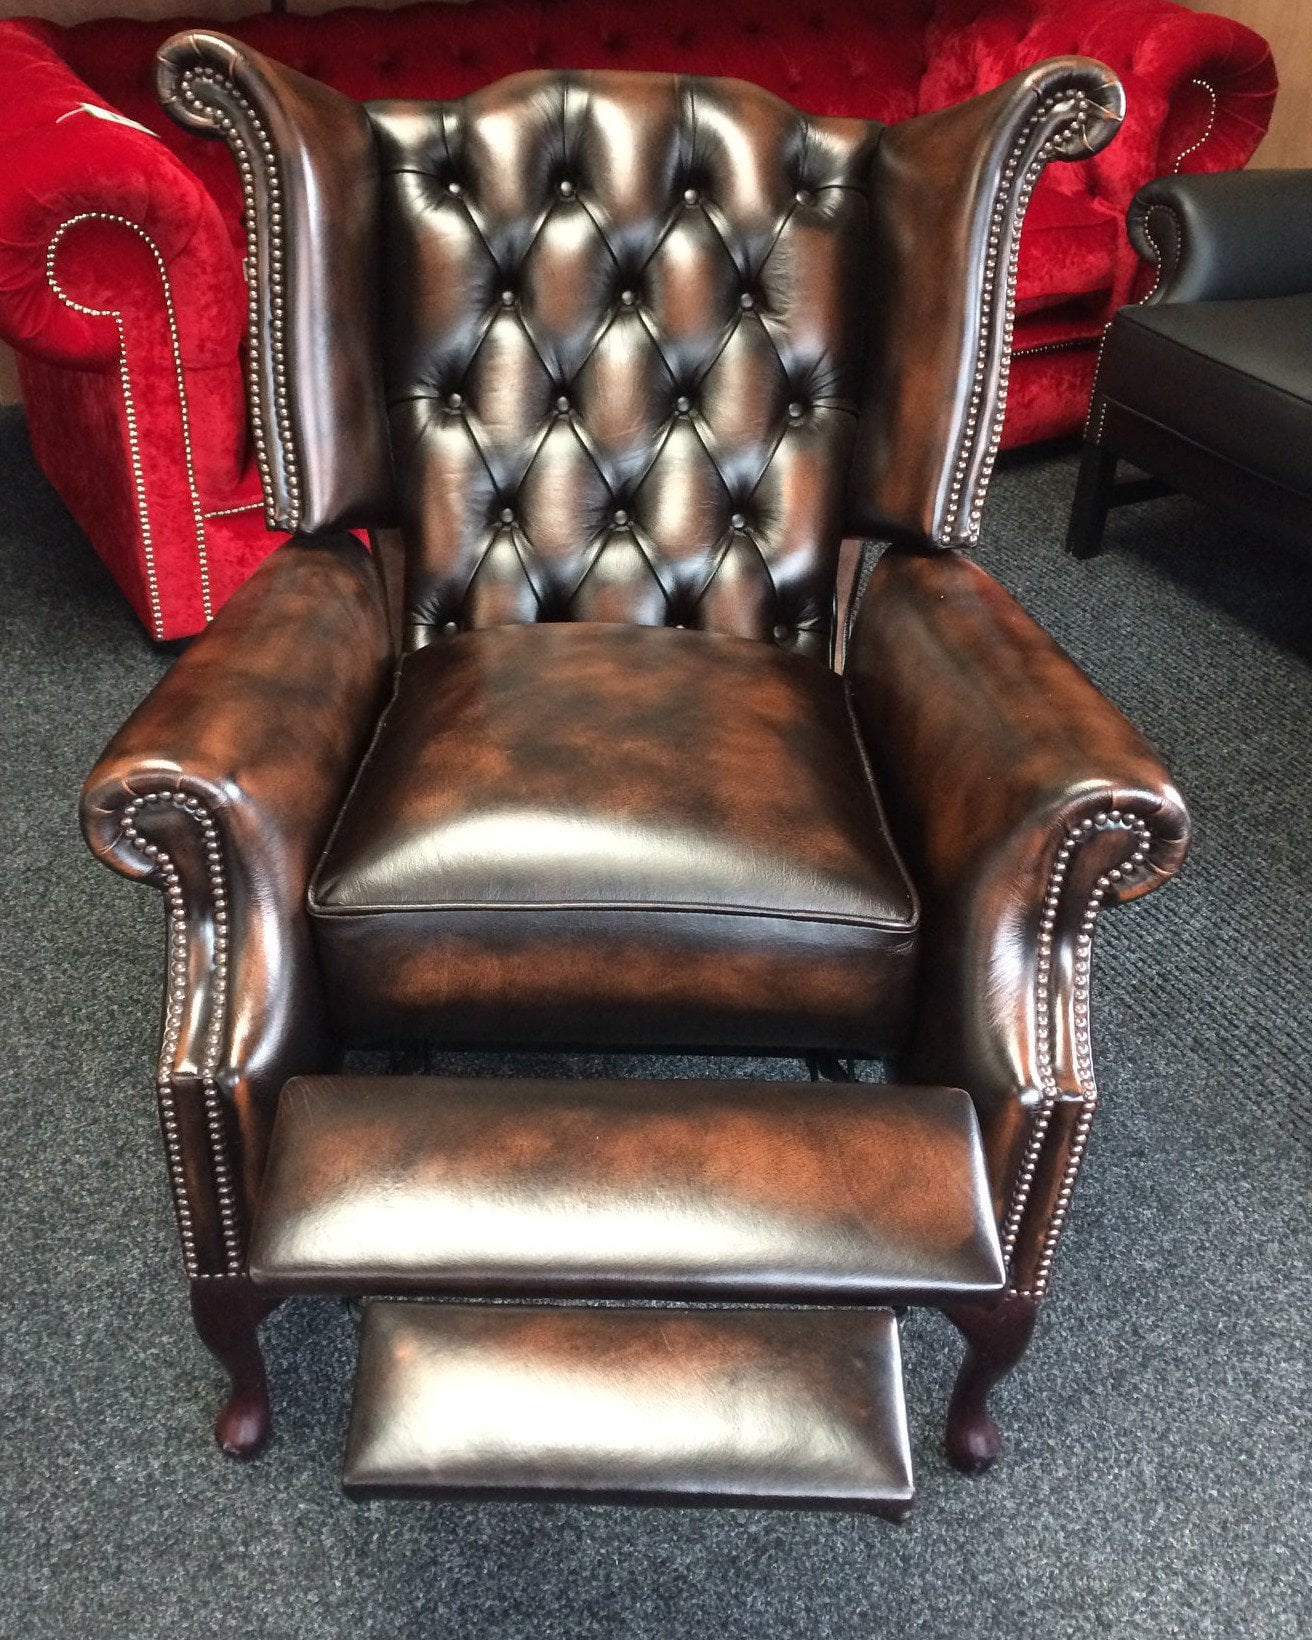 ON SALE! Chesterfield Wing Back Recliner Chair only £500